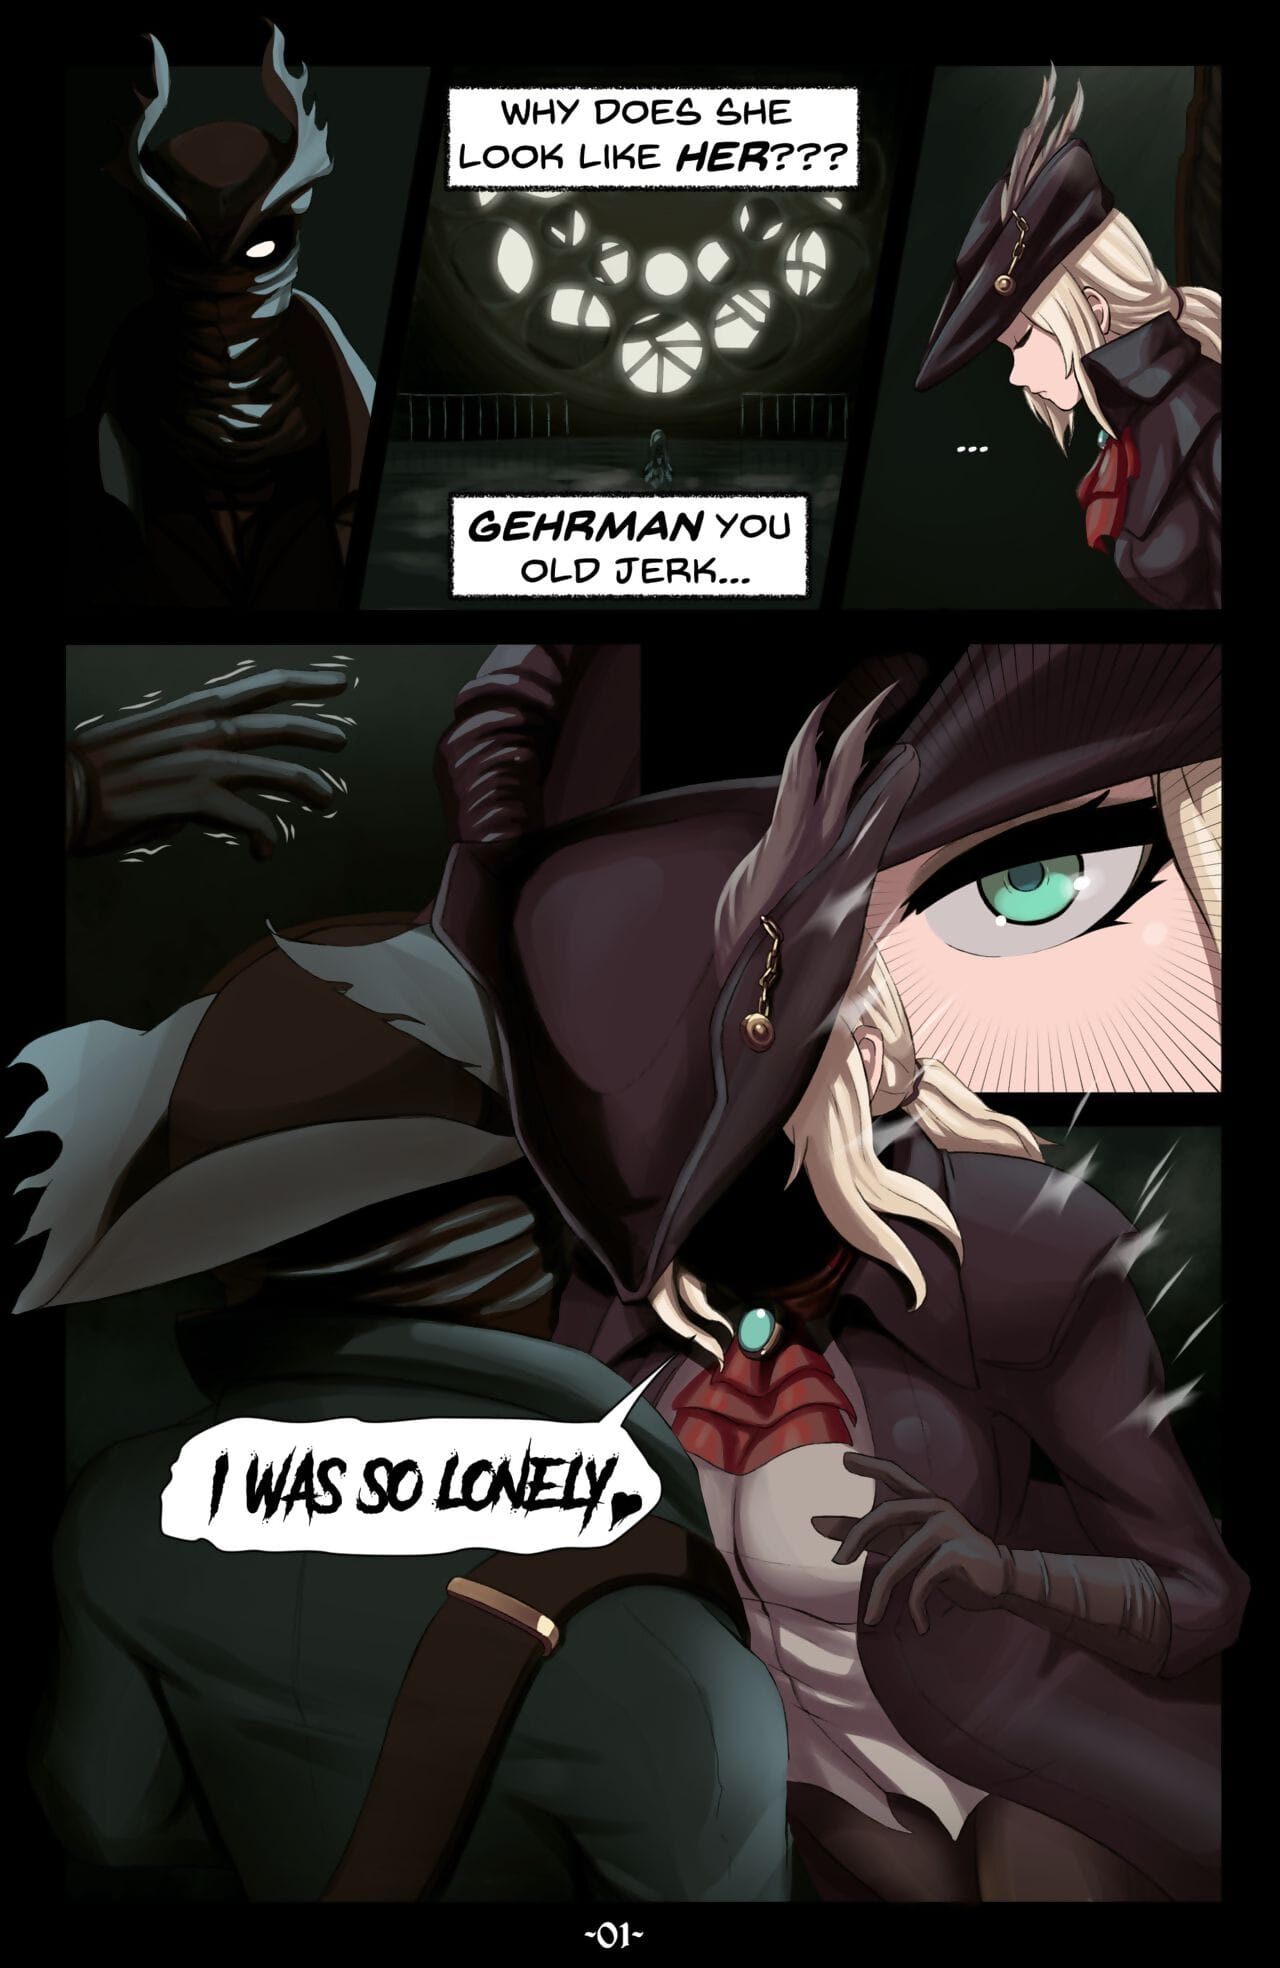 NowaJoestar- Lady Maria of the Astral Cocktower page 1